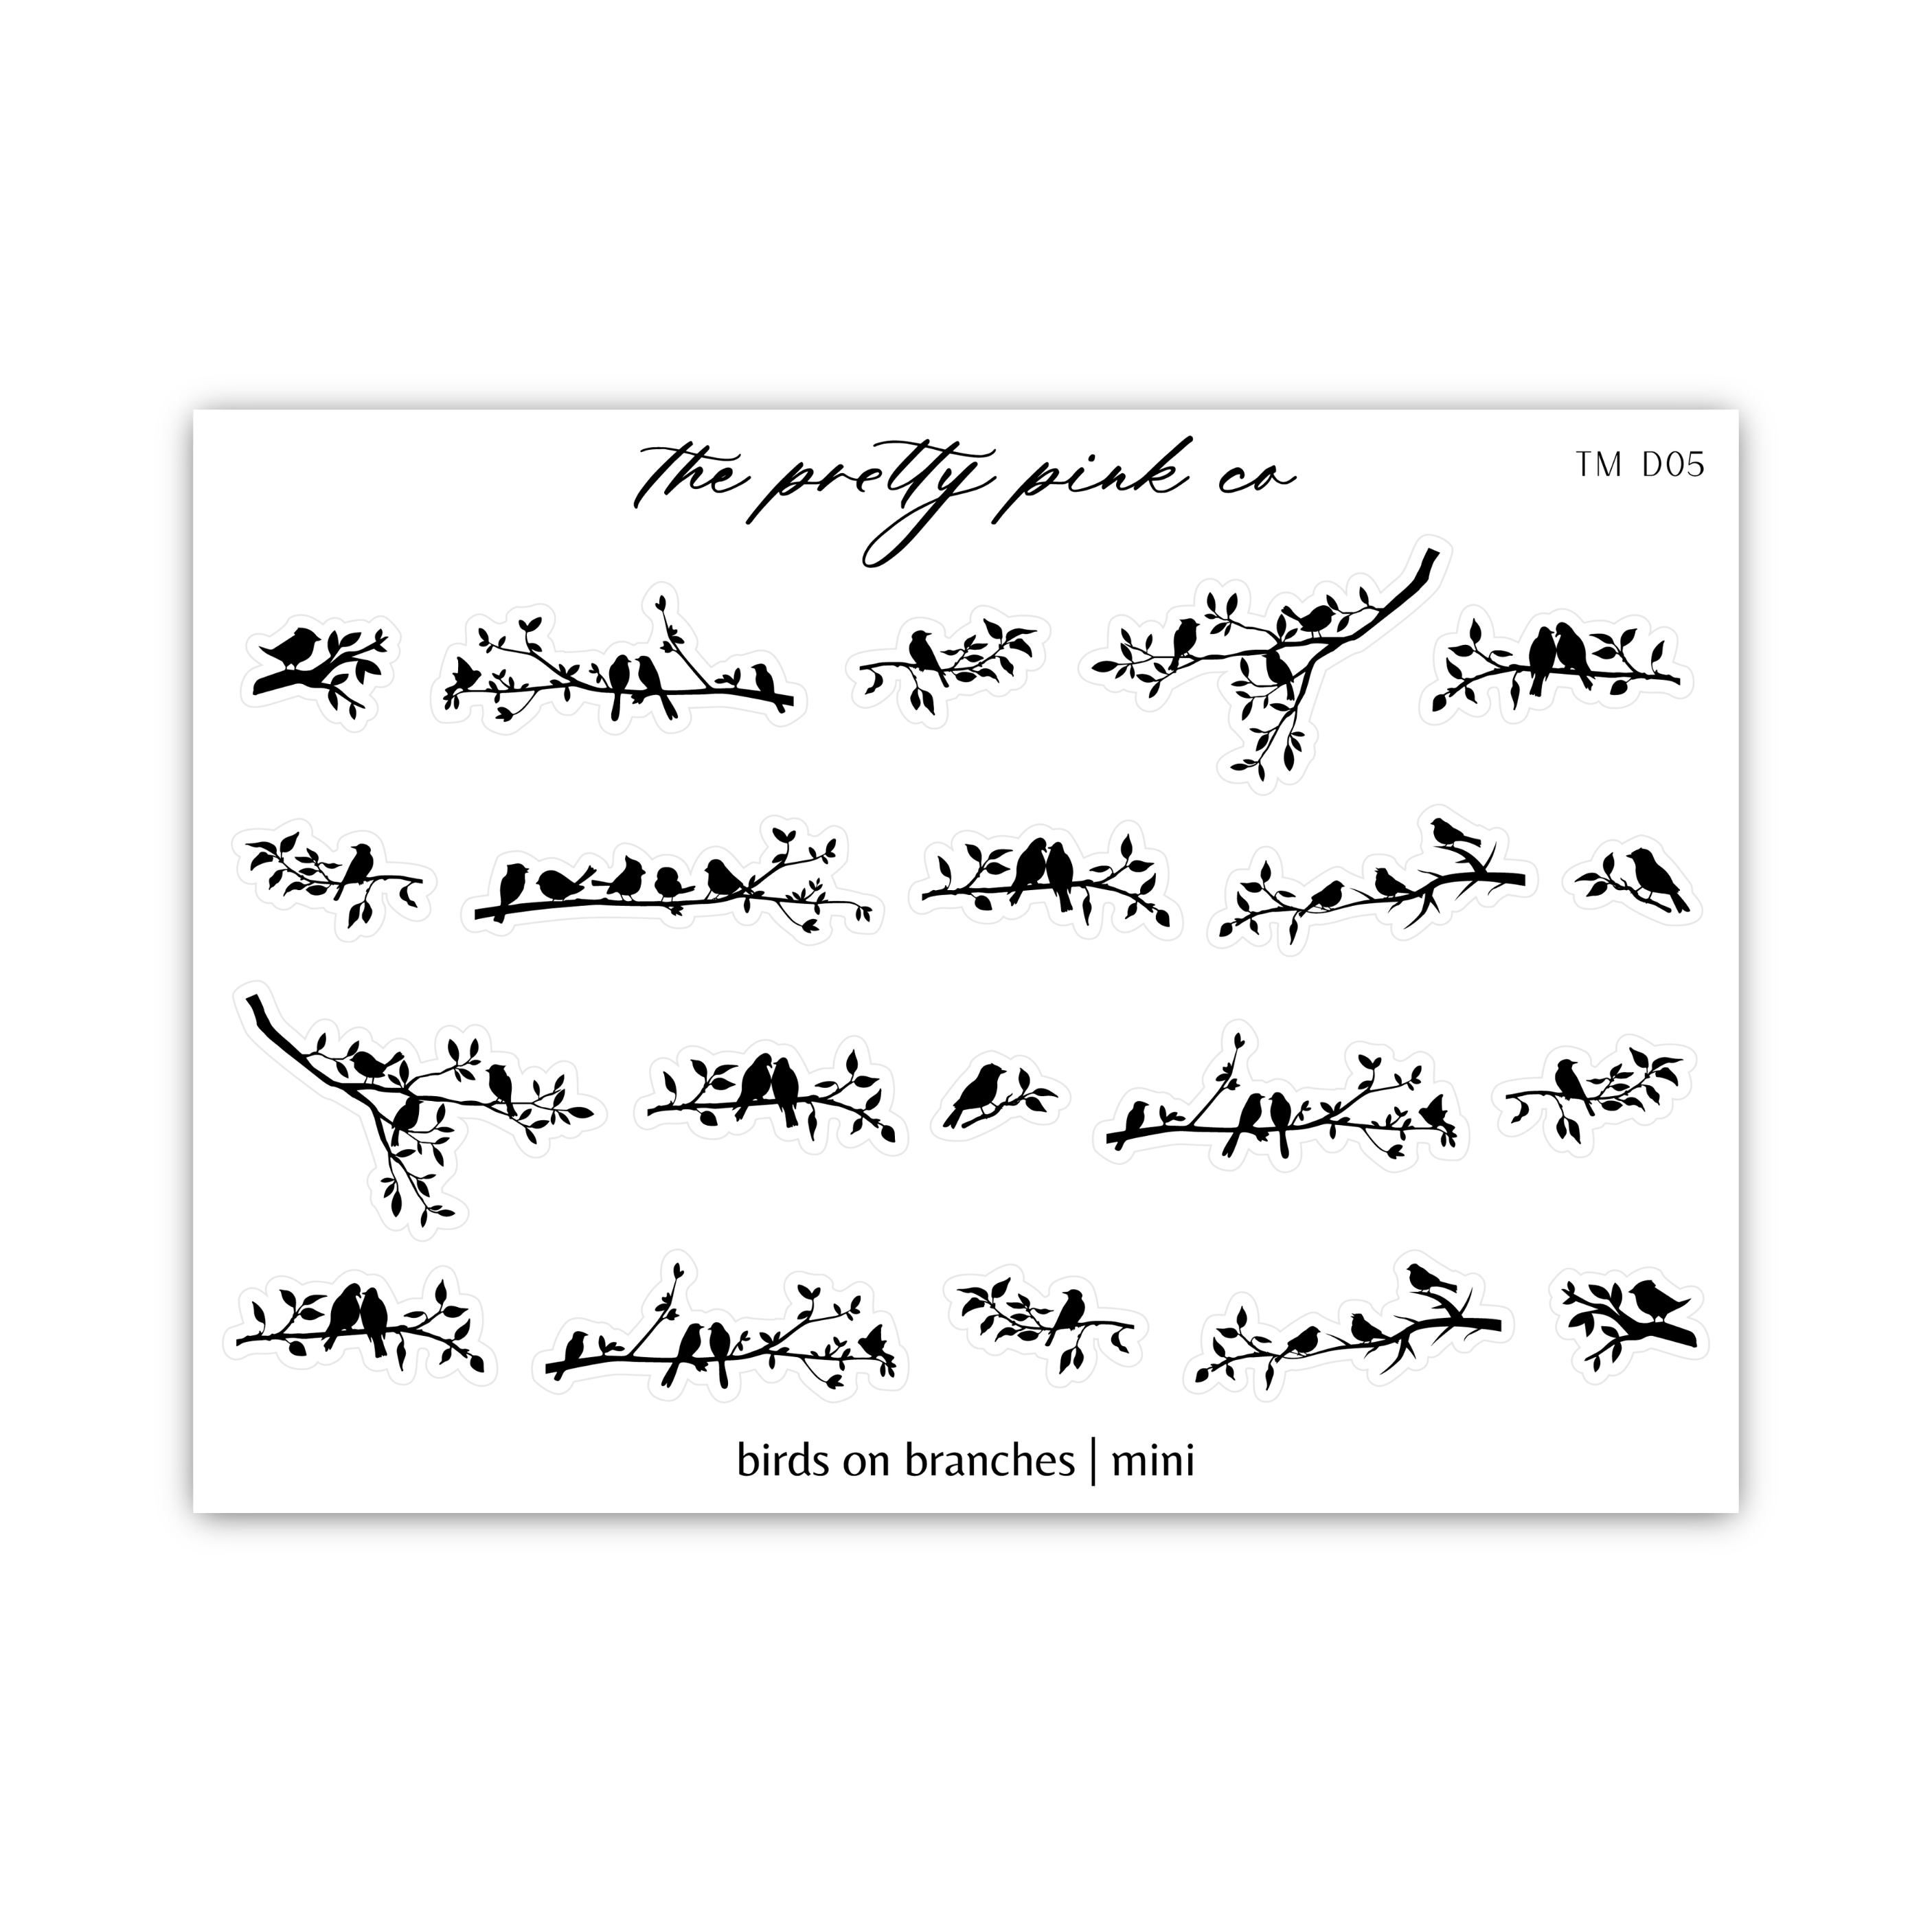 the birds on branches print on a white background